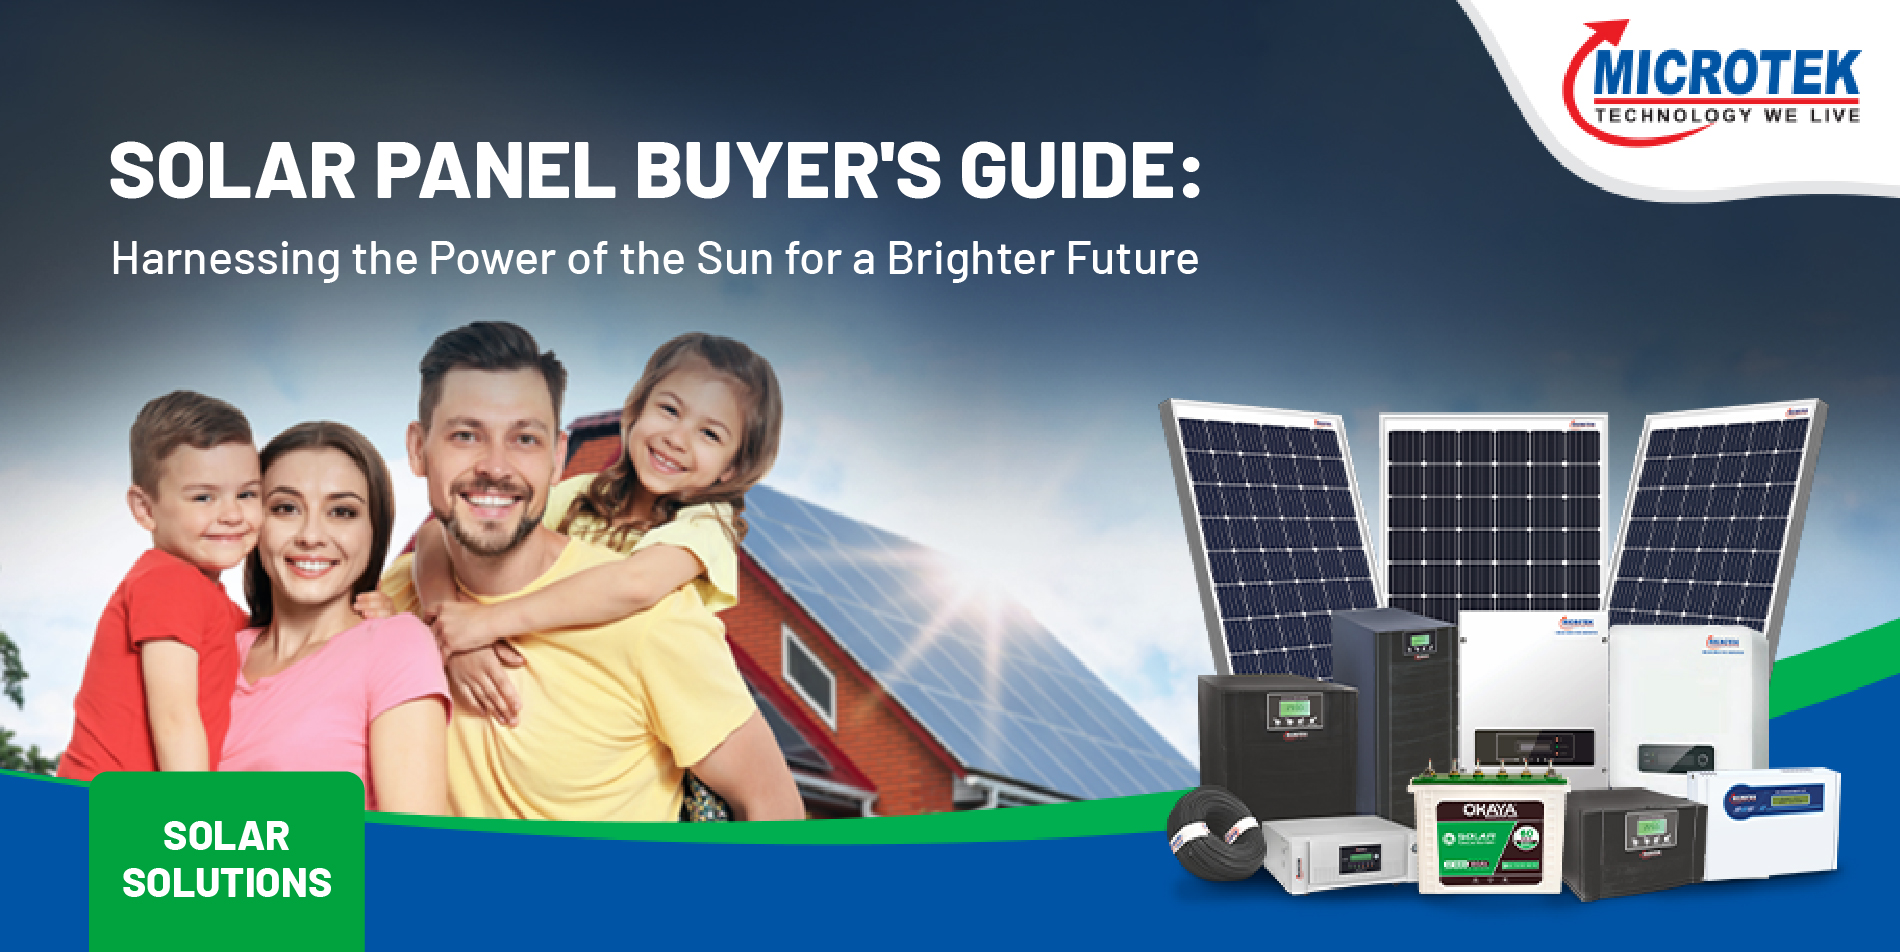 Solar Panel Buyer’s Guide: Harnessing the Power of the Sun for a Brighter Future